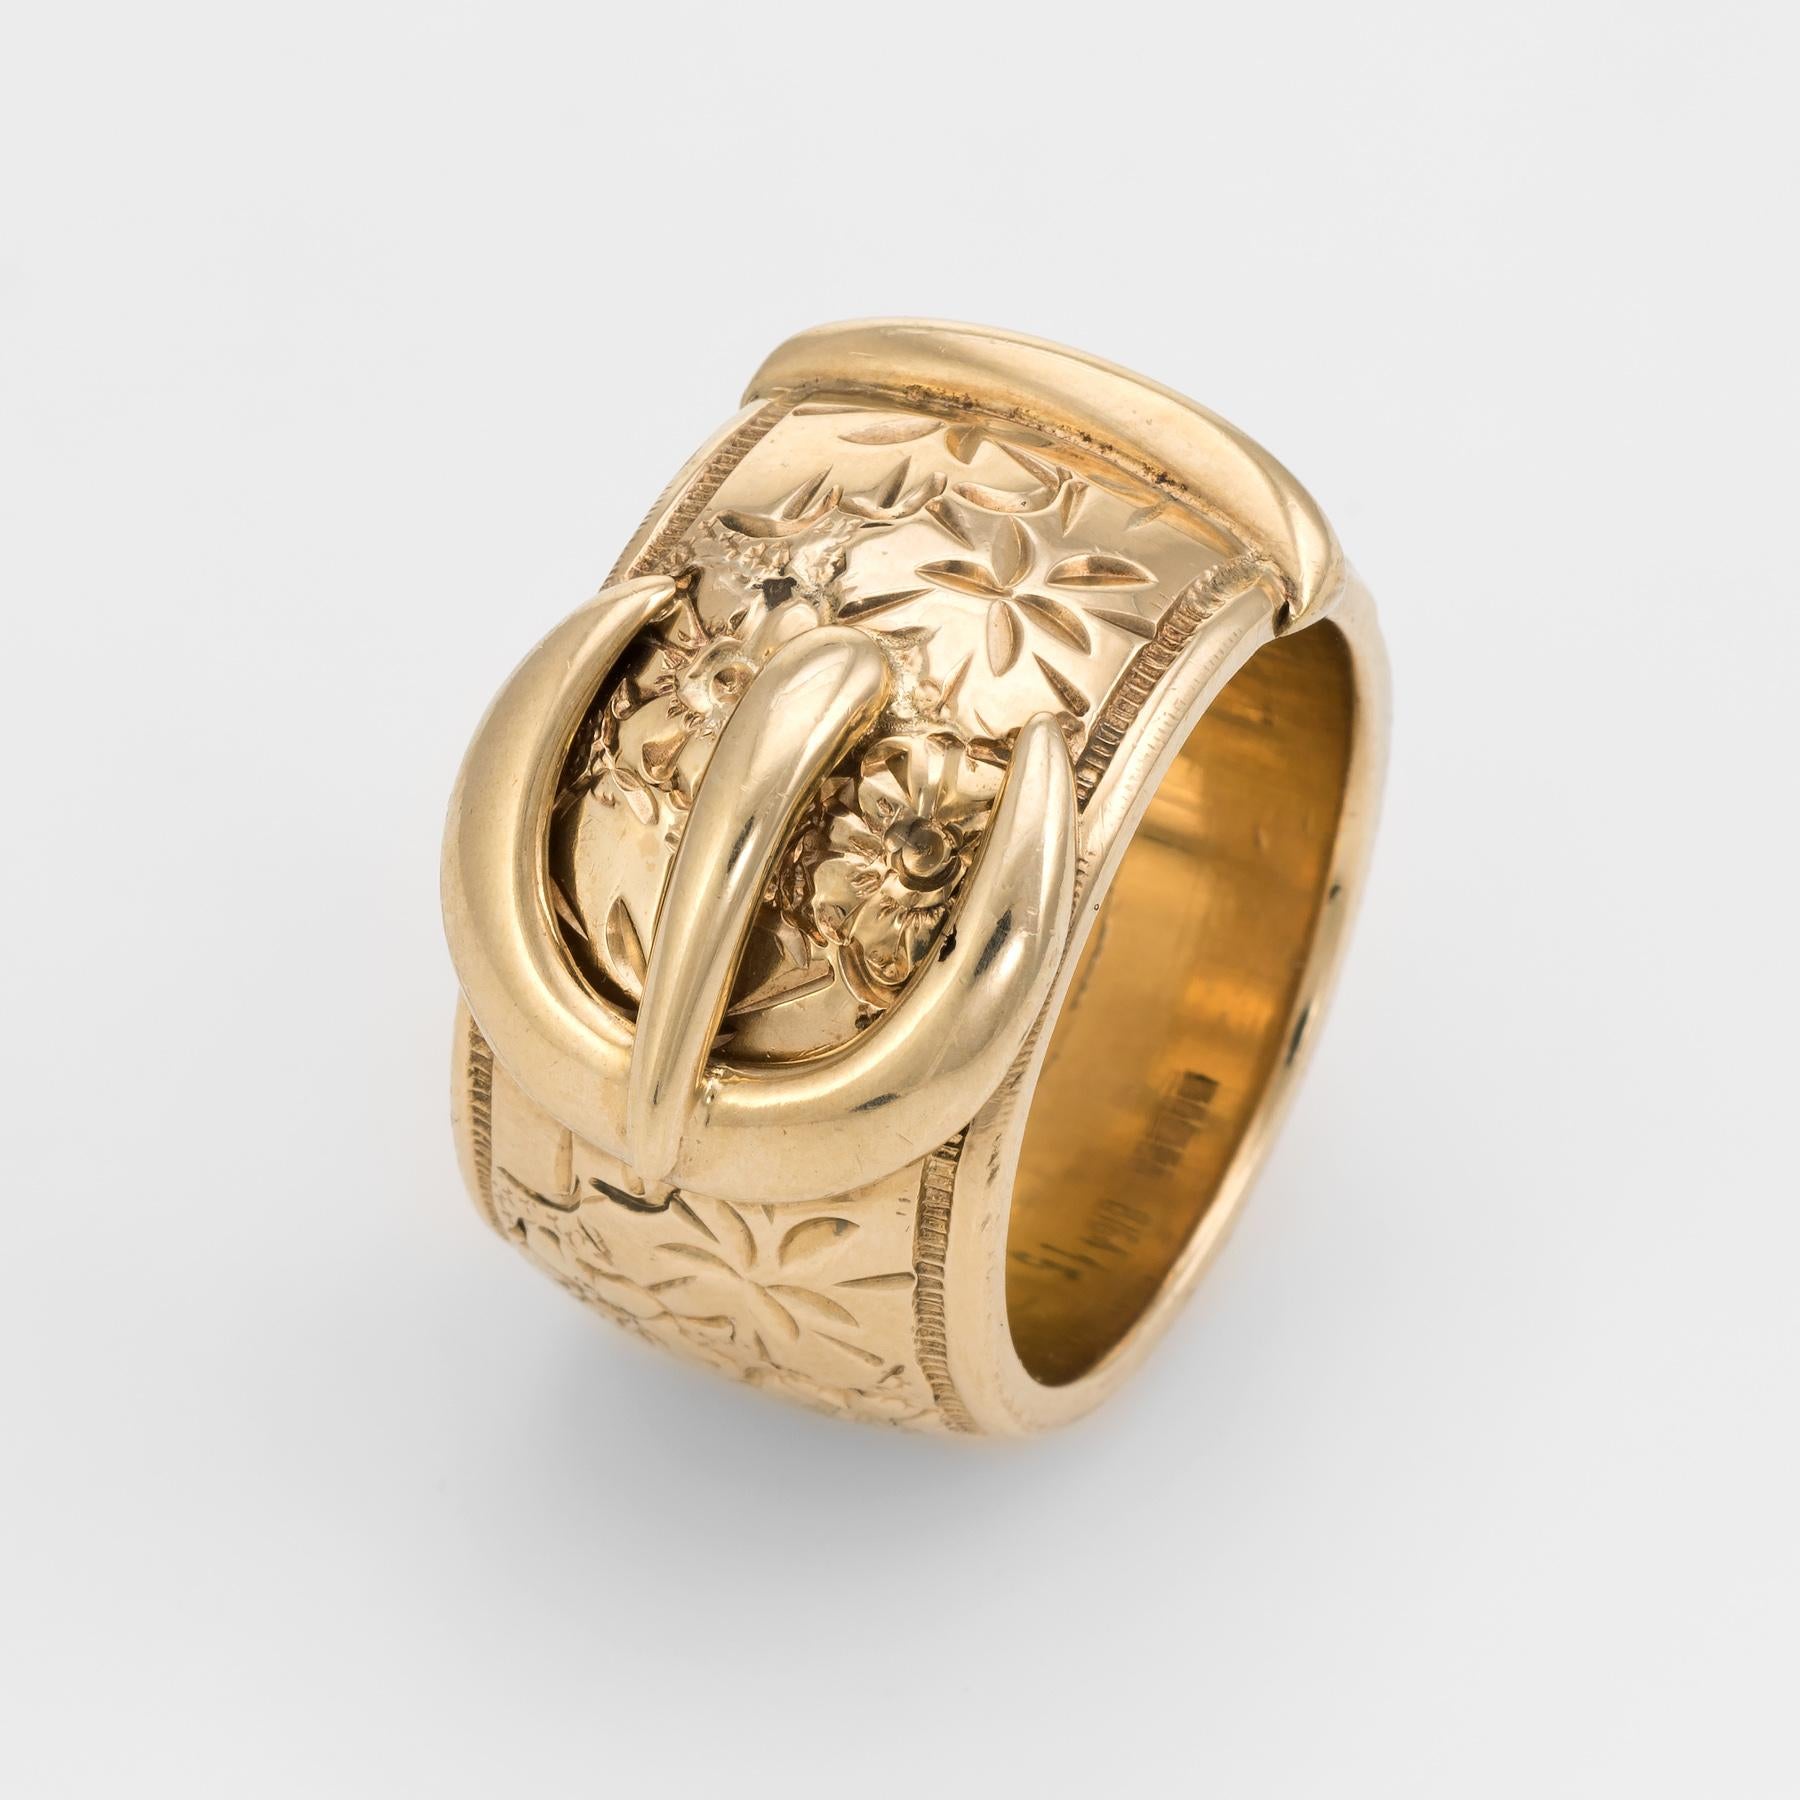 Finely detailed vintage buckle ring (circa 1978), crafted in 9 karat yellow gold. 

The buckle ring holds a lovely sentiment, representing the joining of two lives. The band features an etched flower and foliate design. The ring was made for a man